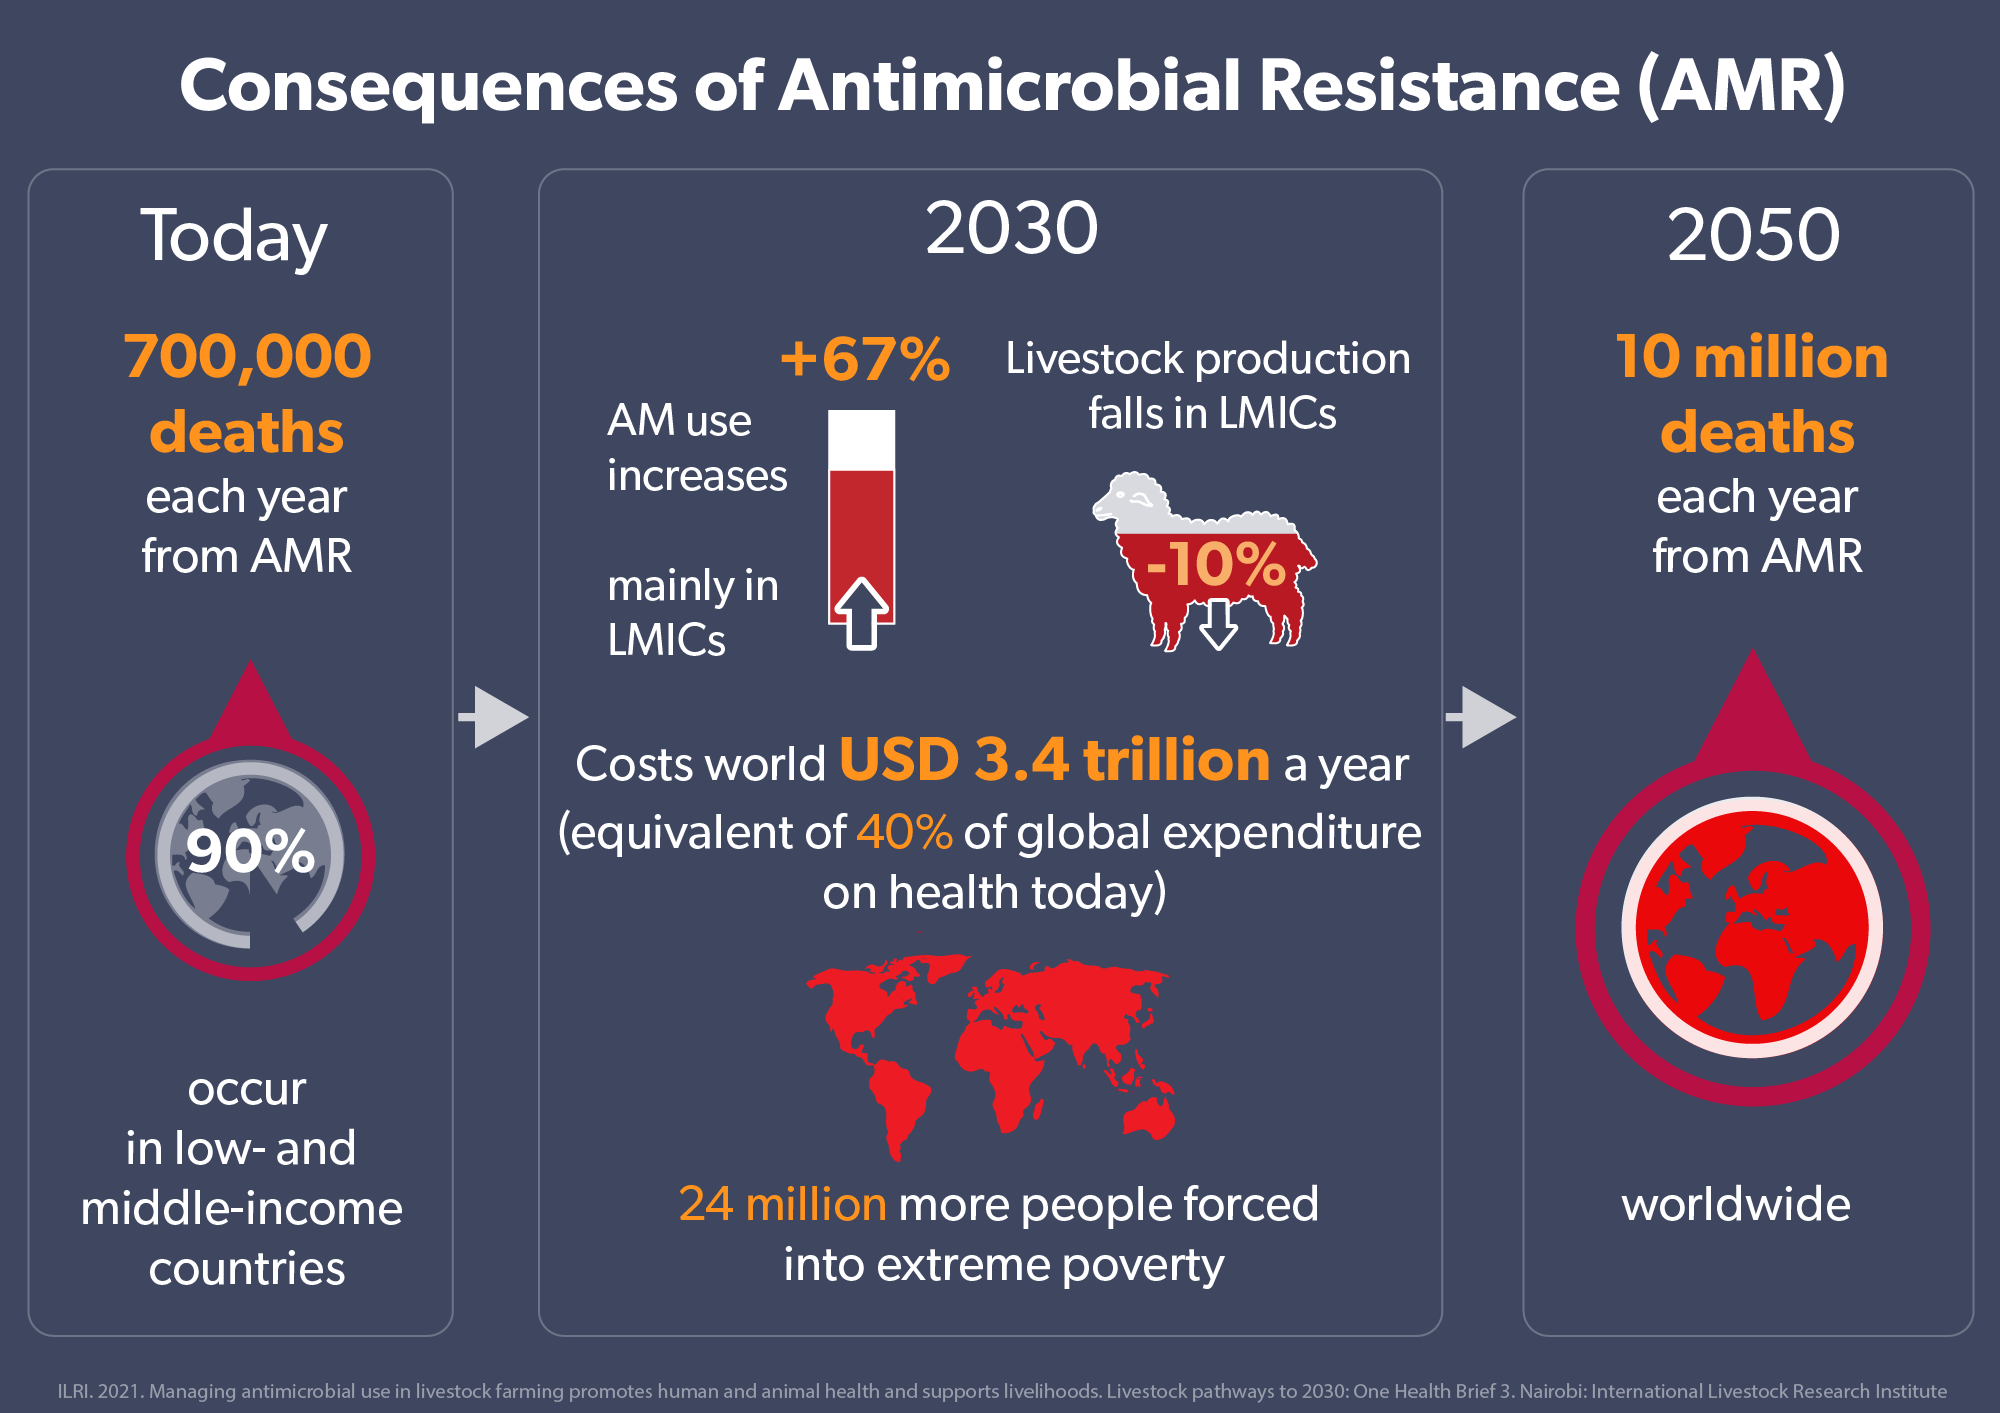 Consequences of not controlling AMR